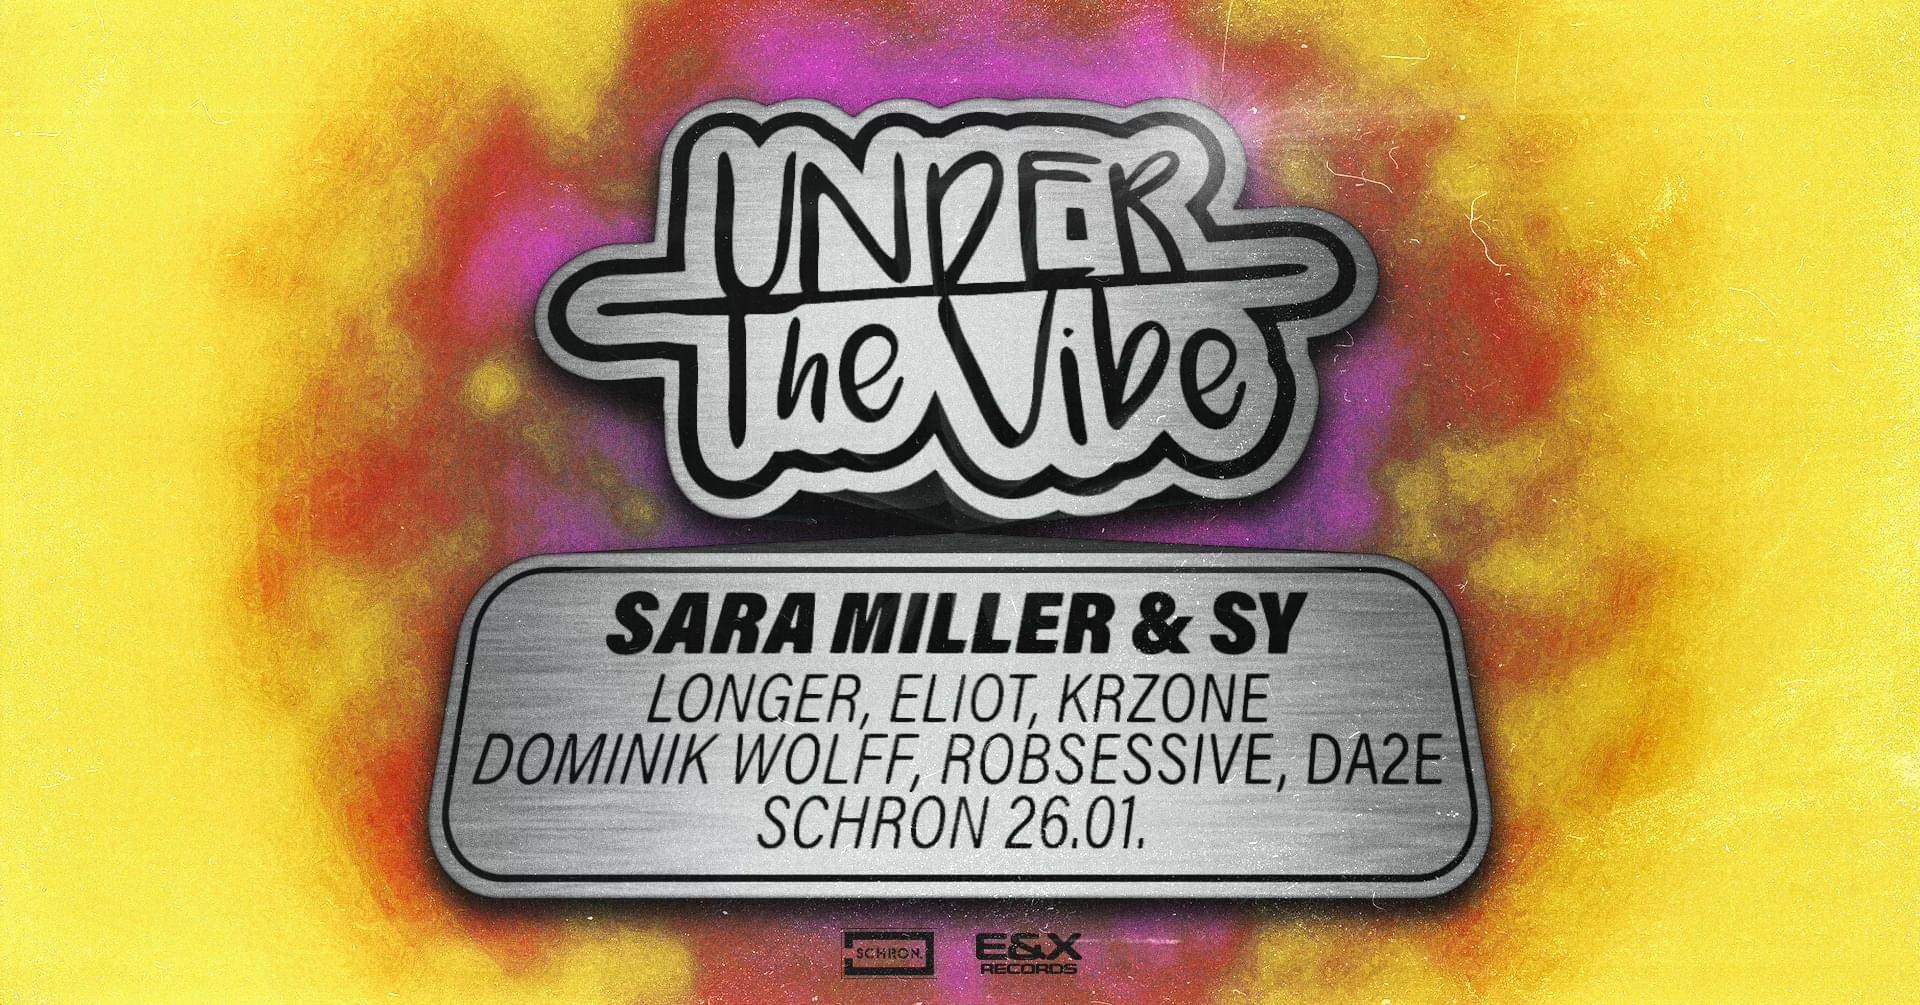 Under The Vibe: Sara Miller & SY - フライヤー表